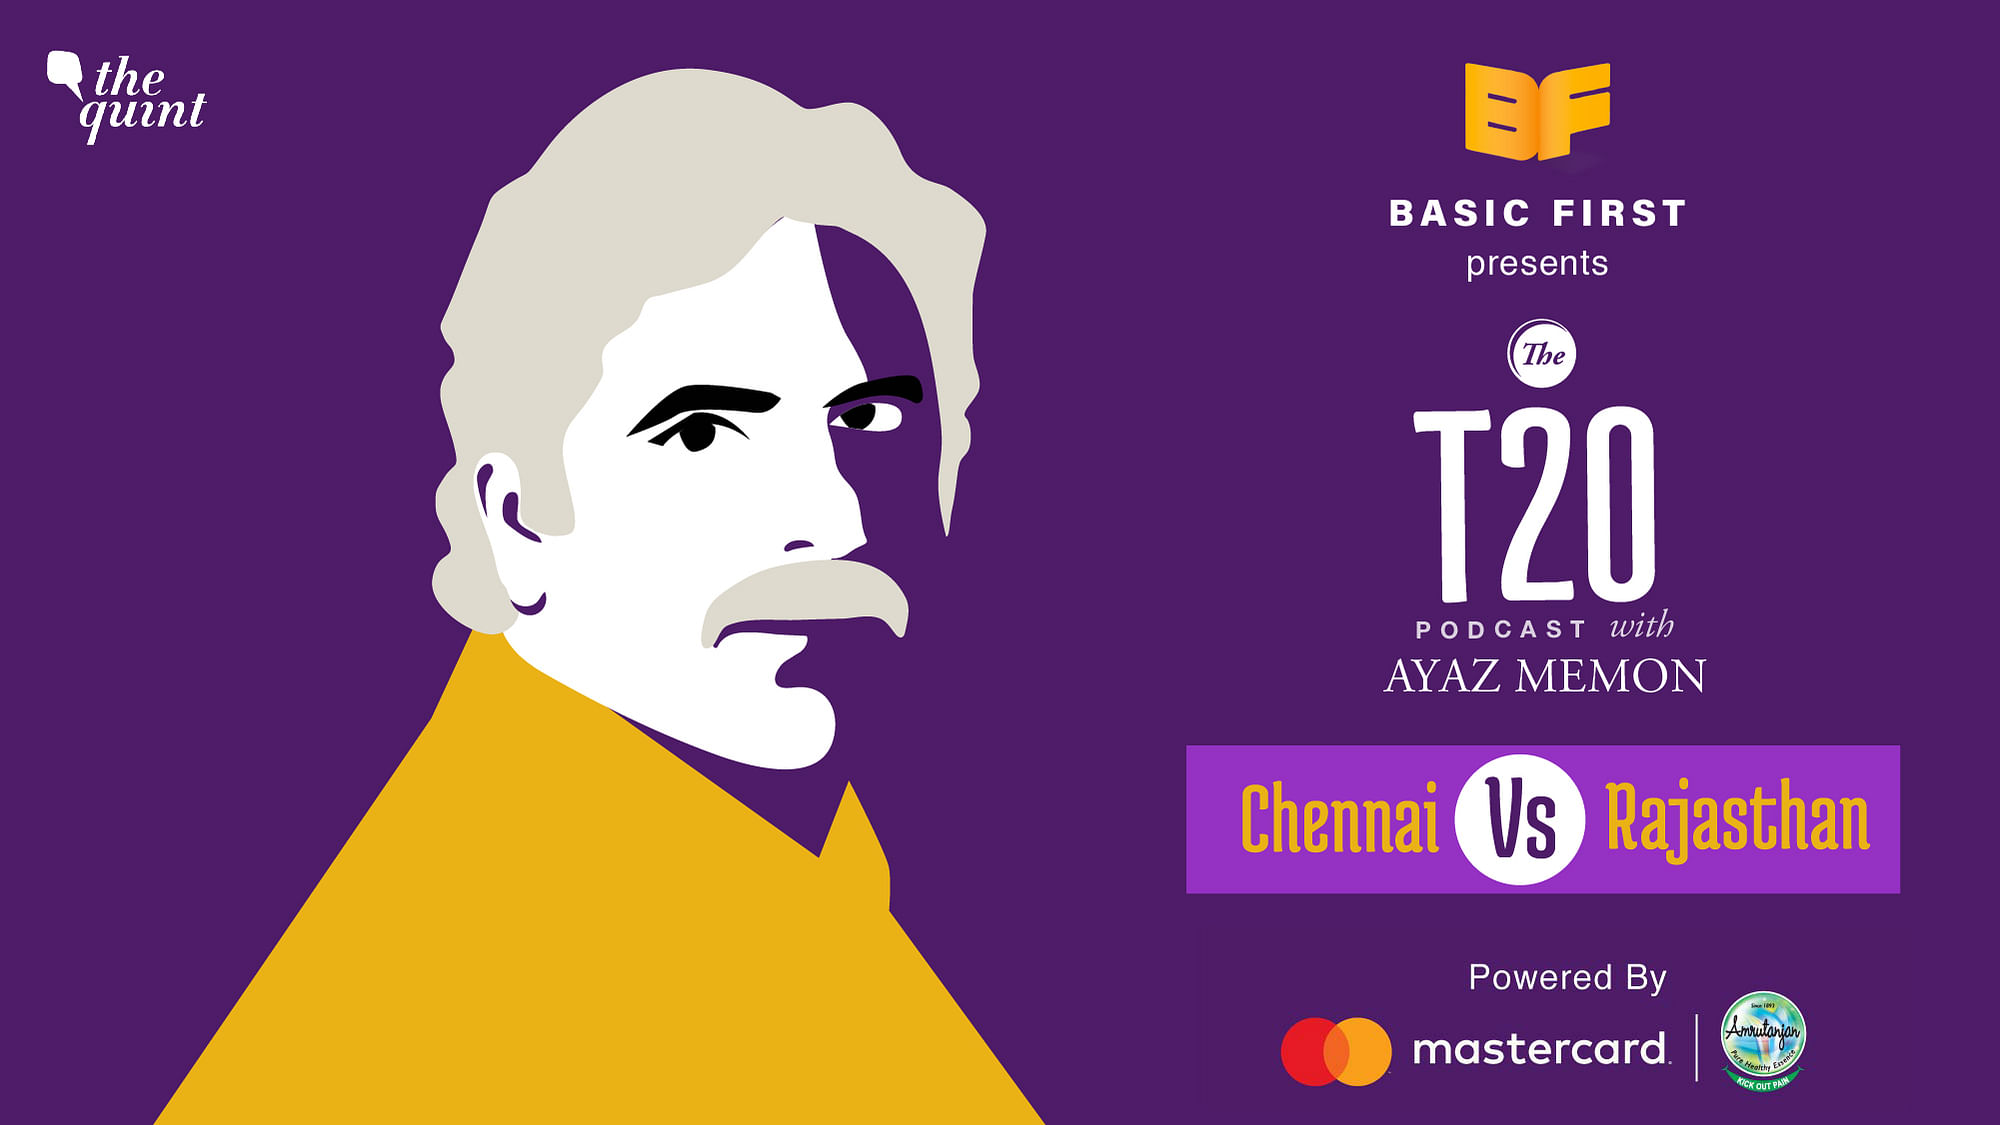 On Episode 37 of The T20 Podcast, Ayaz Memon and Mendra Dorjey talk about Rajasthan’s 7 wicket win over Chennai on Monday night in Abu Dhabi.